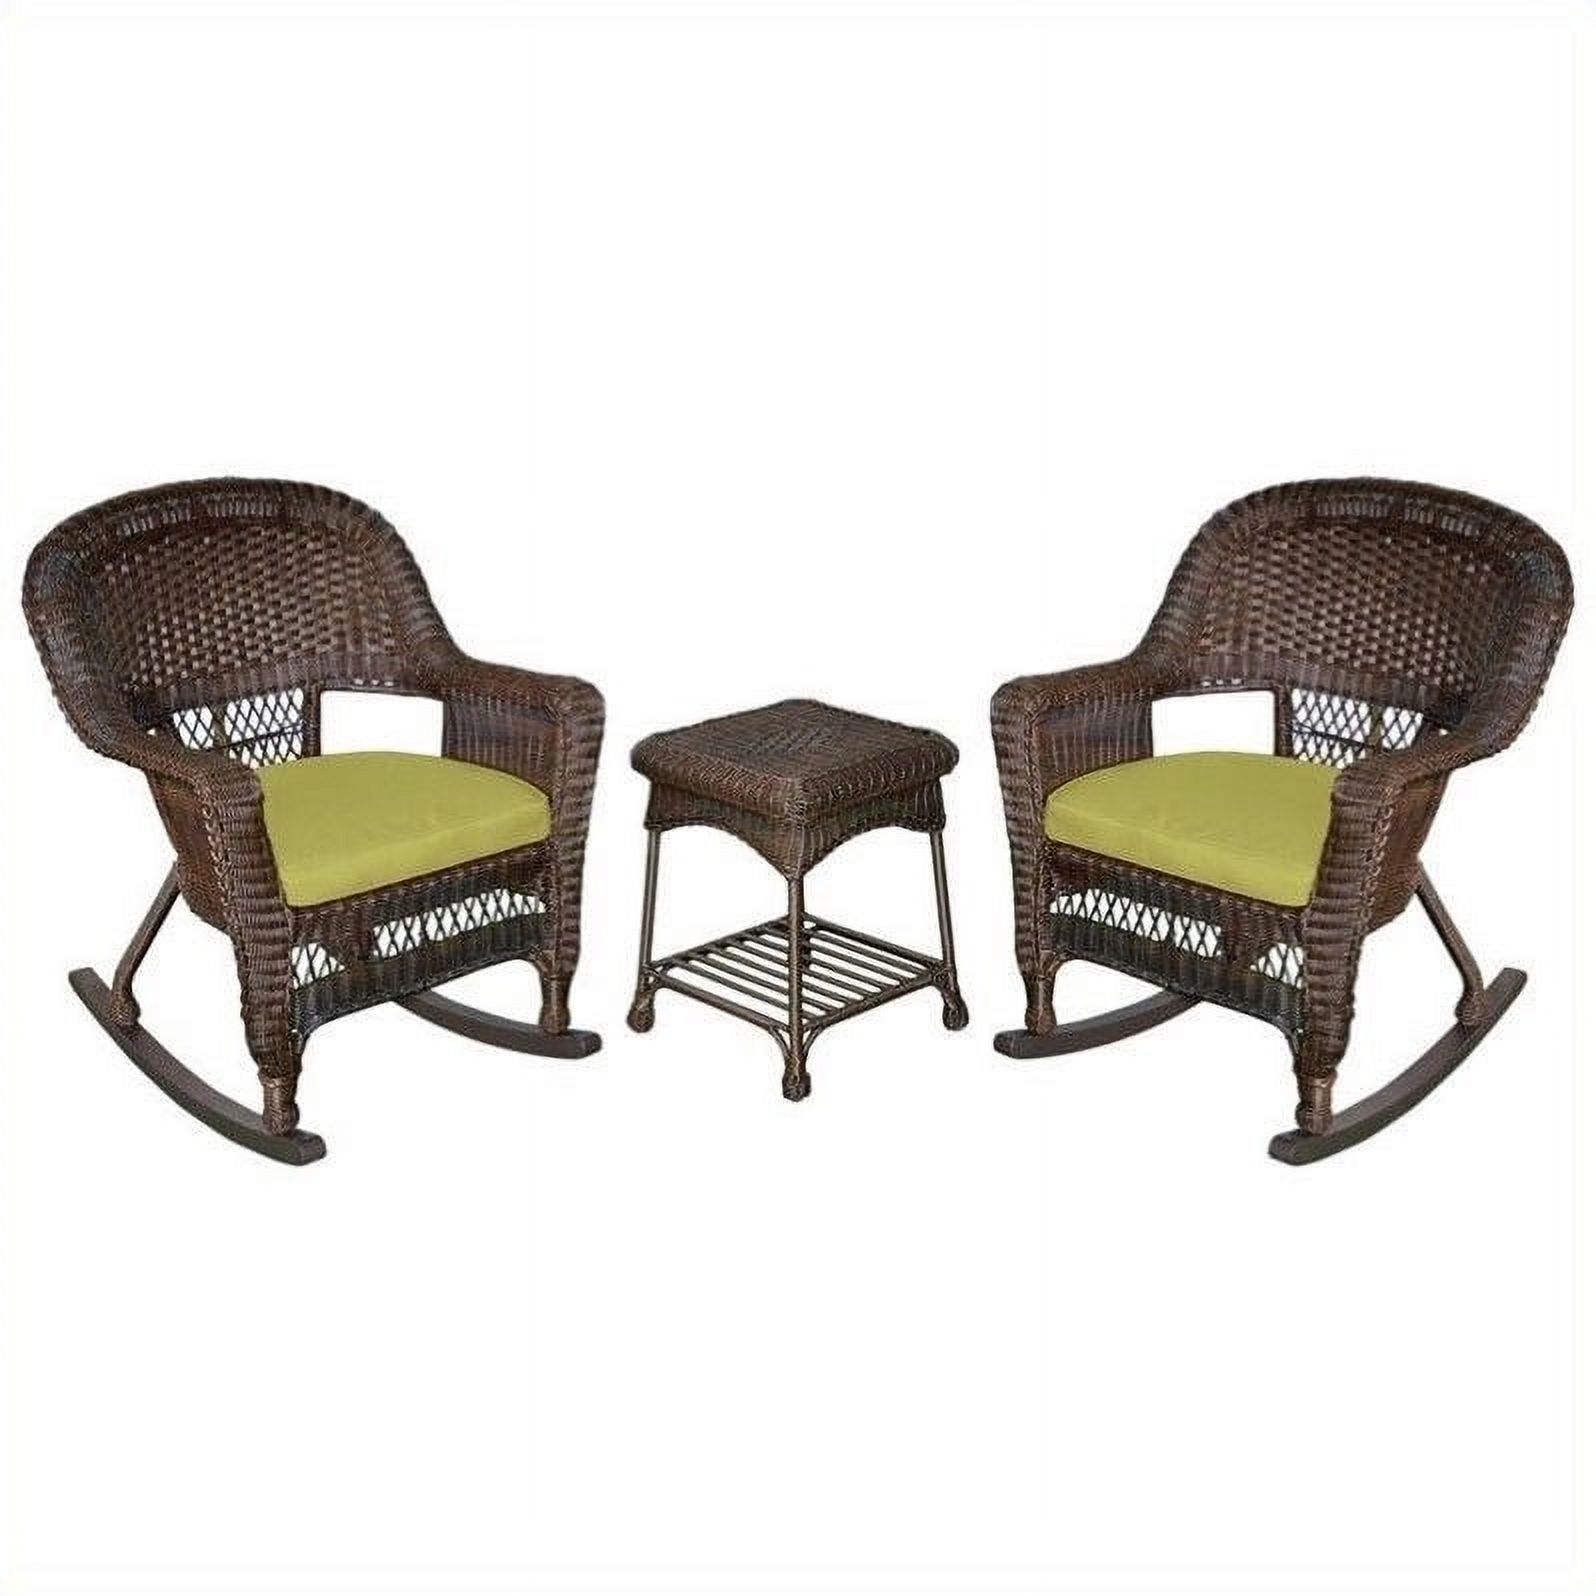 Jeco 3pc Wicker Rocker Chair Set in Espresso with Green Cushion - image 1 of 1